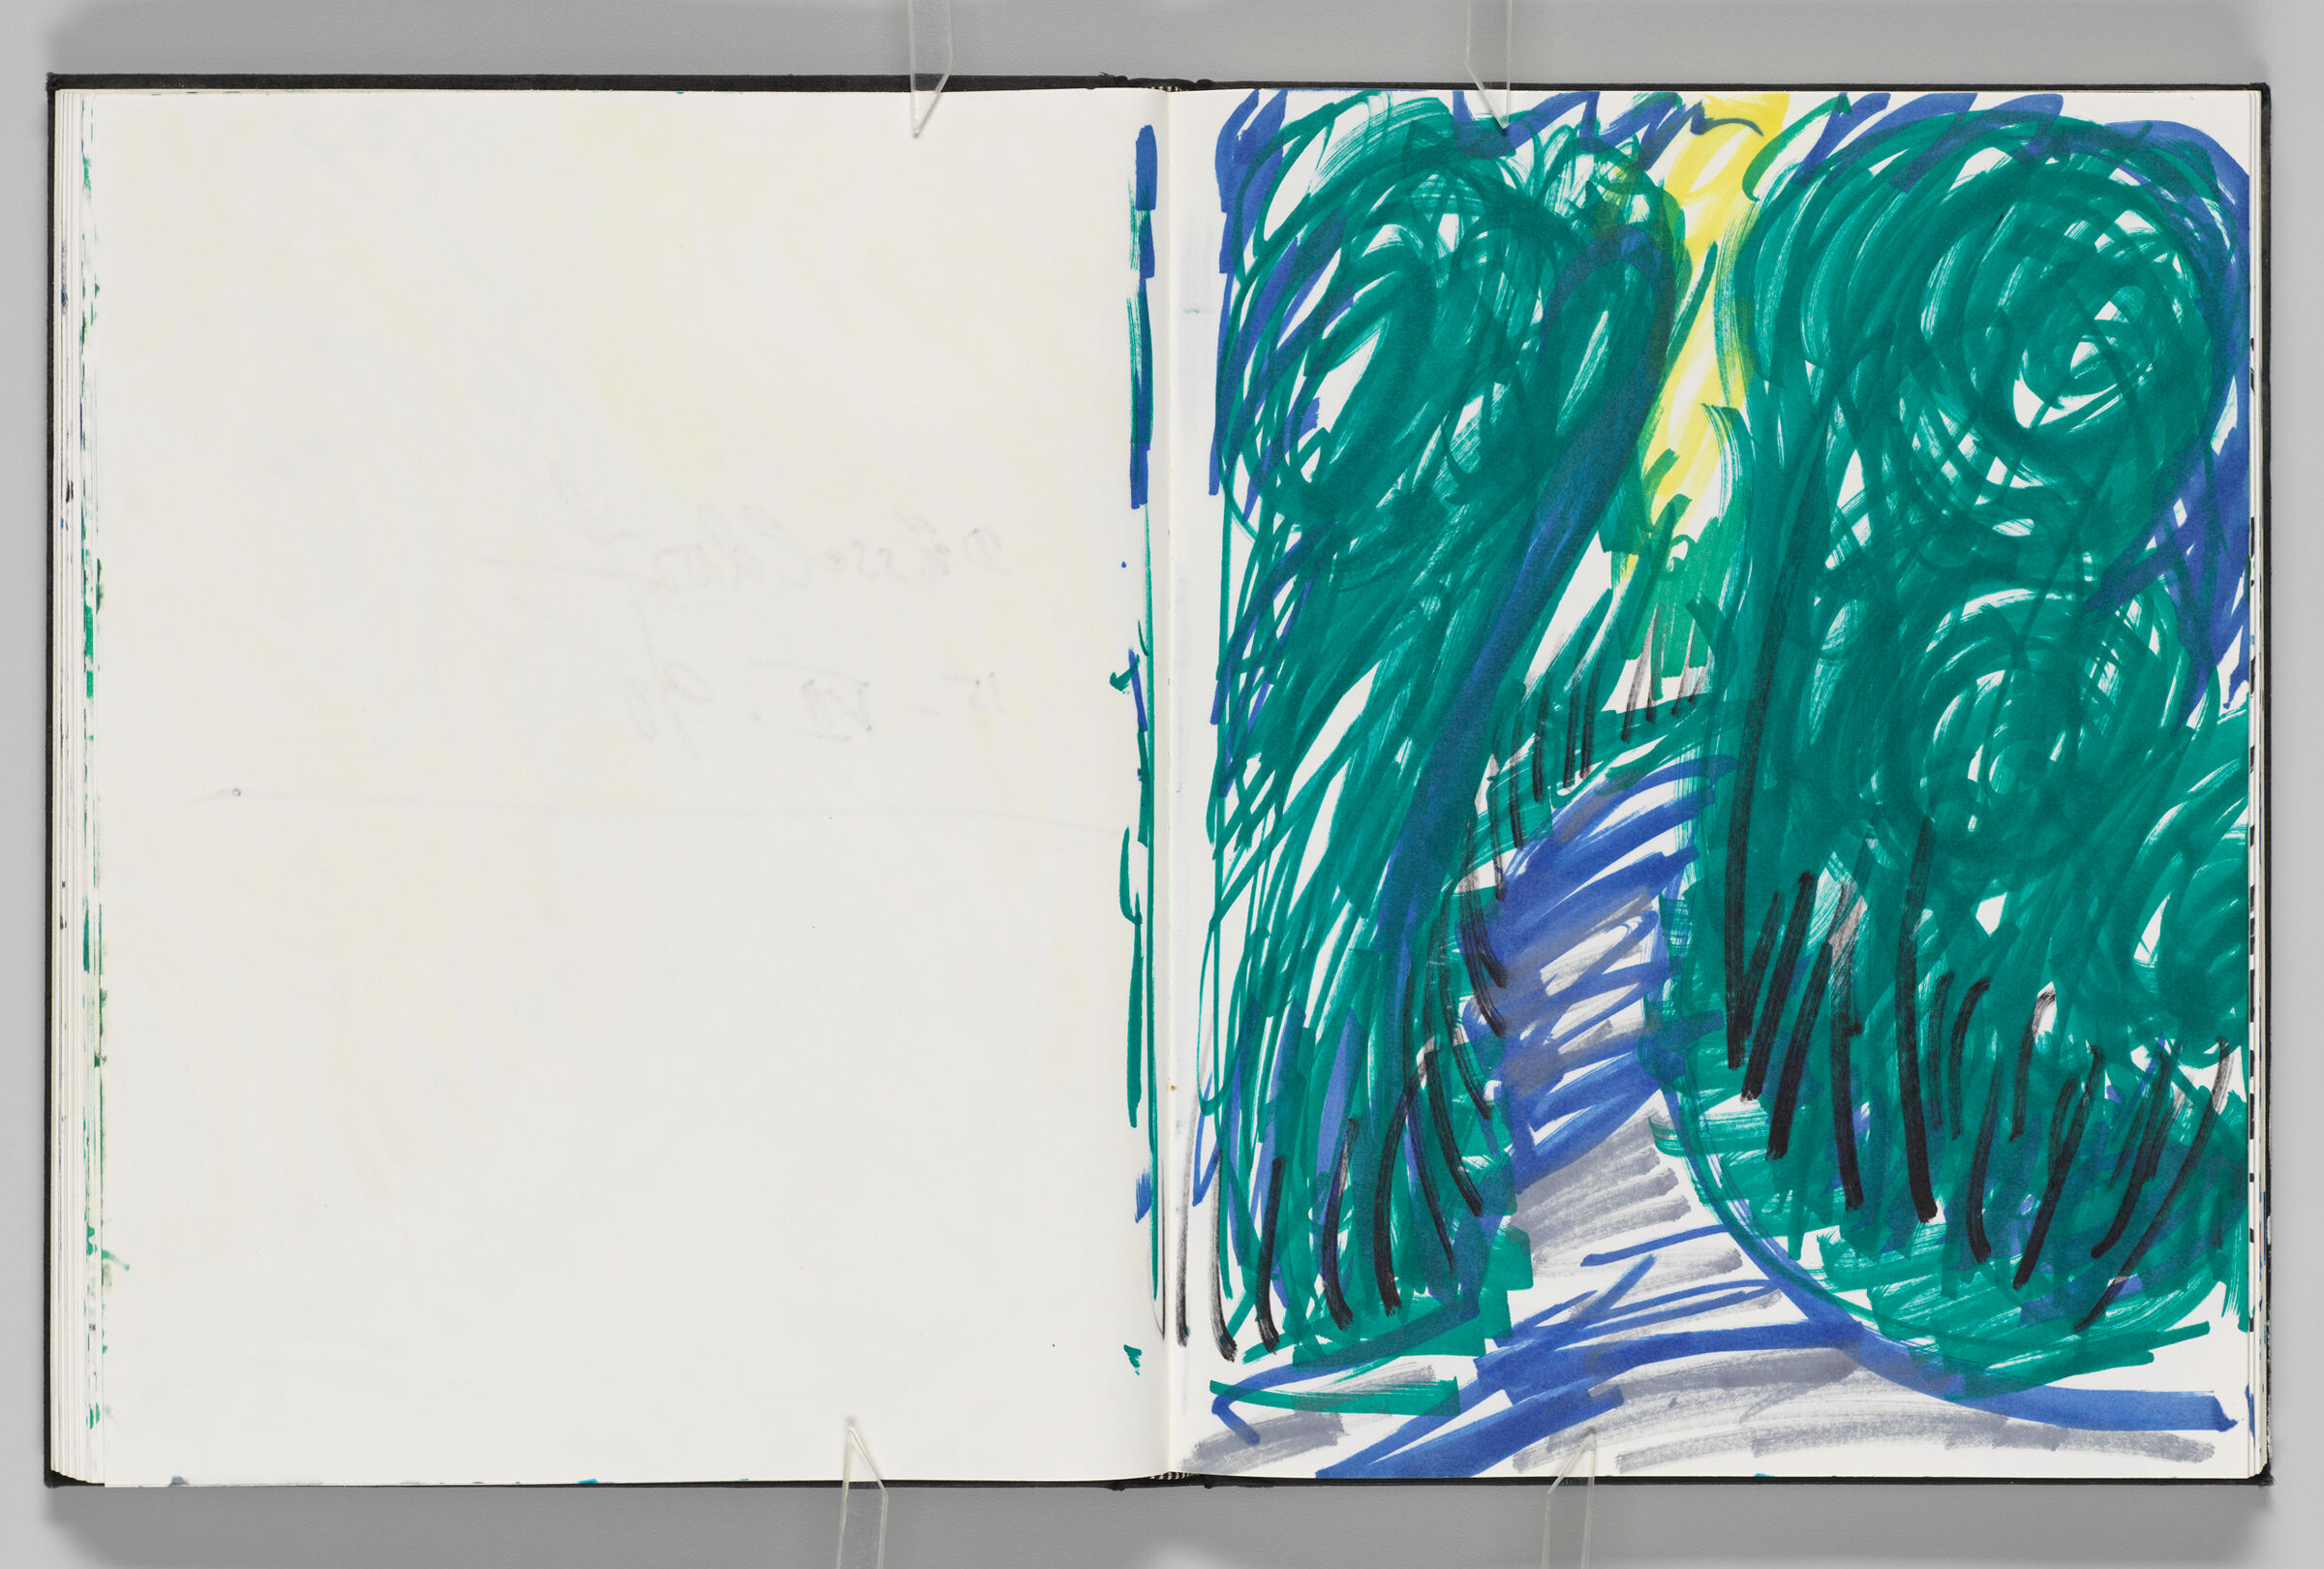 Untitled (Bleed-Through Of Previous Page, Left Page); Untitled (Path In Landscape, Right Page)
